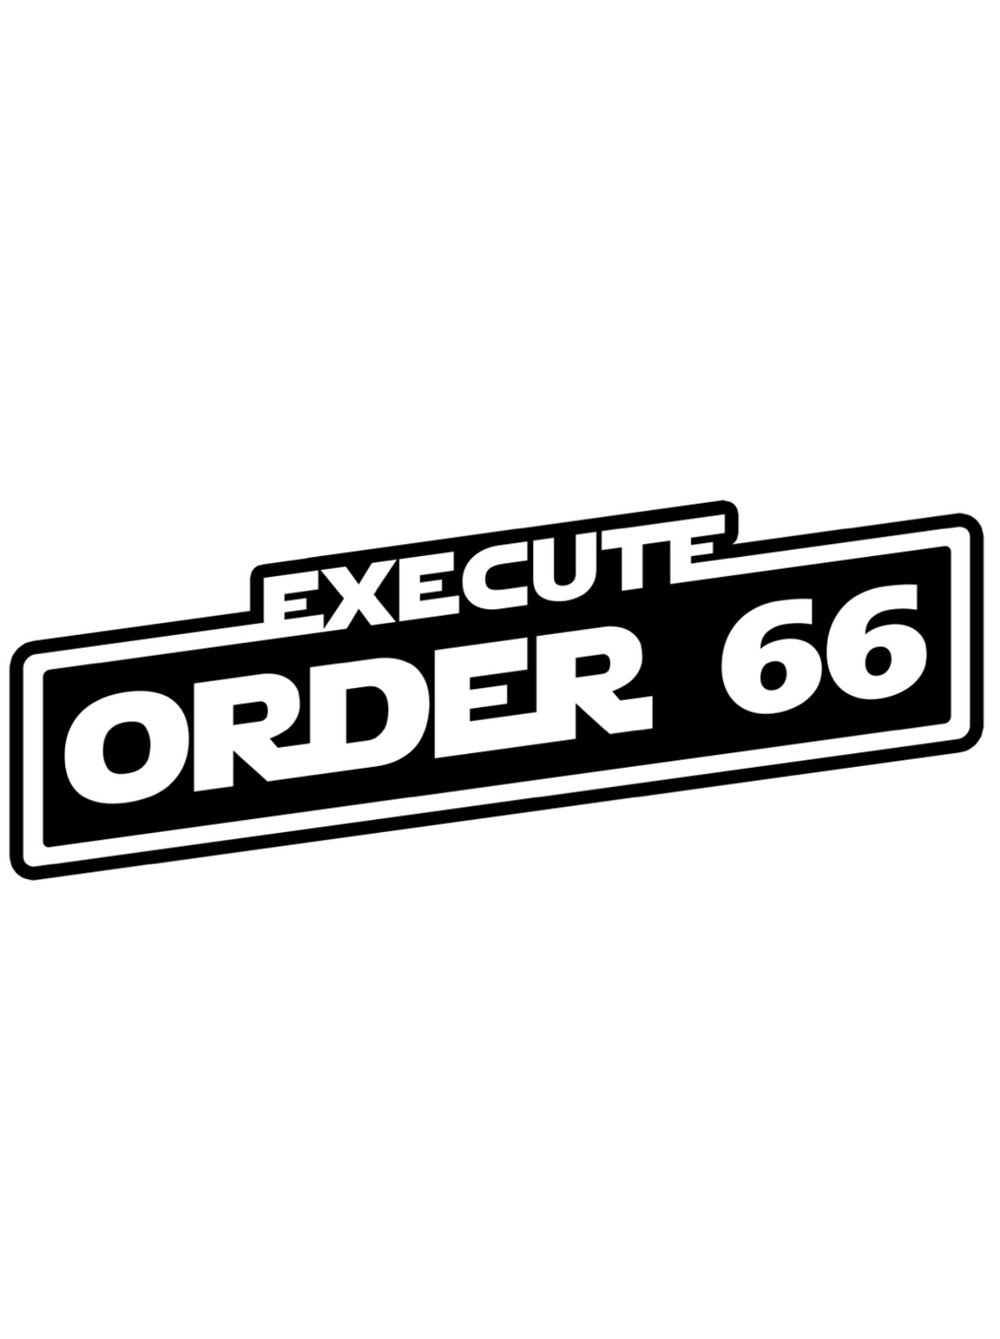 Image of Order66 (Sticker) by Clay Graham